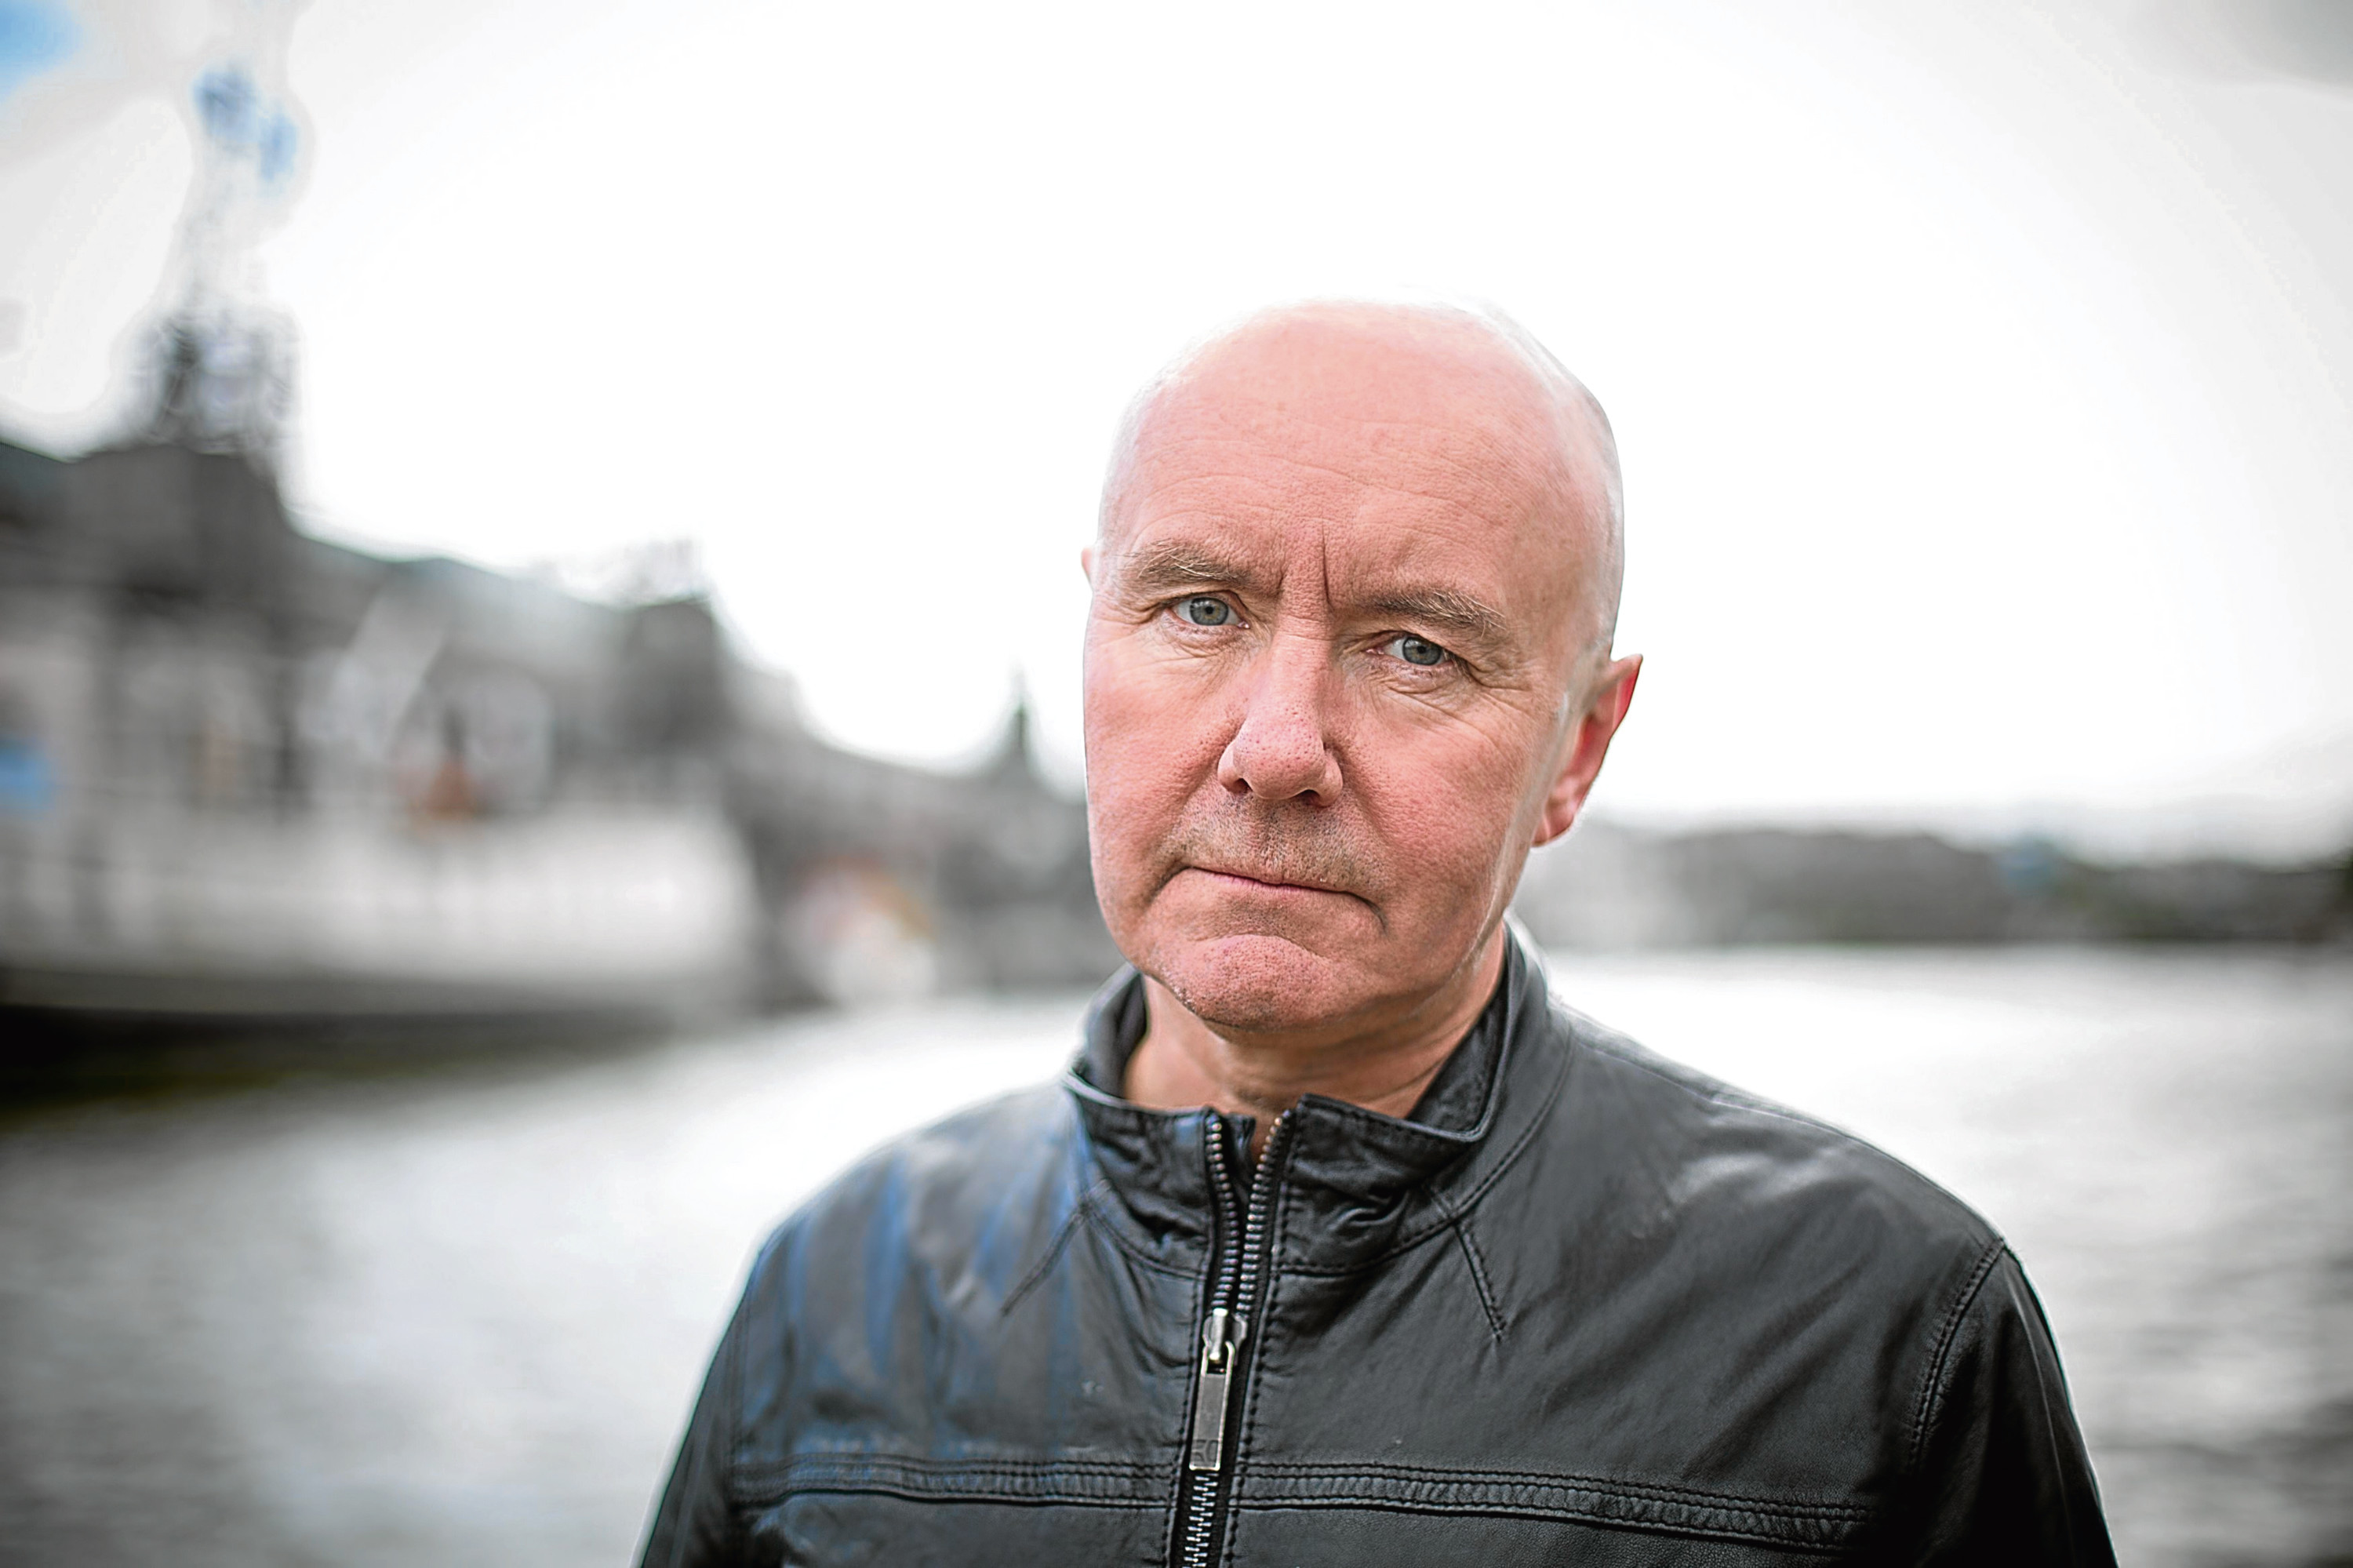 Irvine Welsh, novelist, playwright and short story writer (SWNS/HE Media)